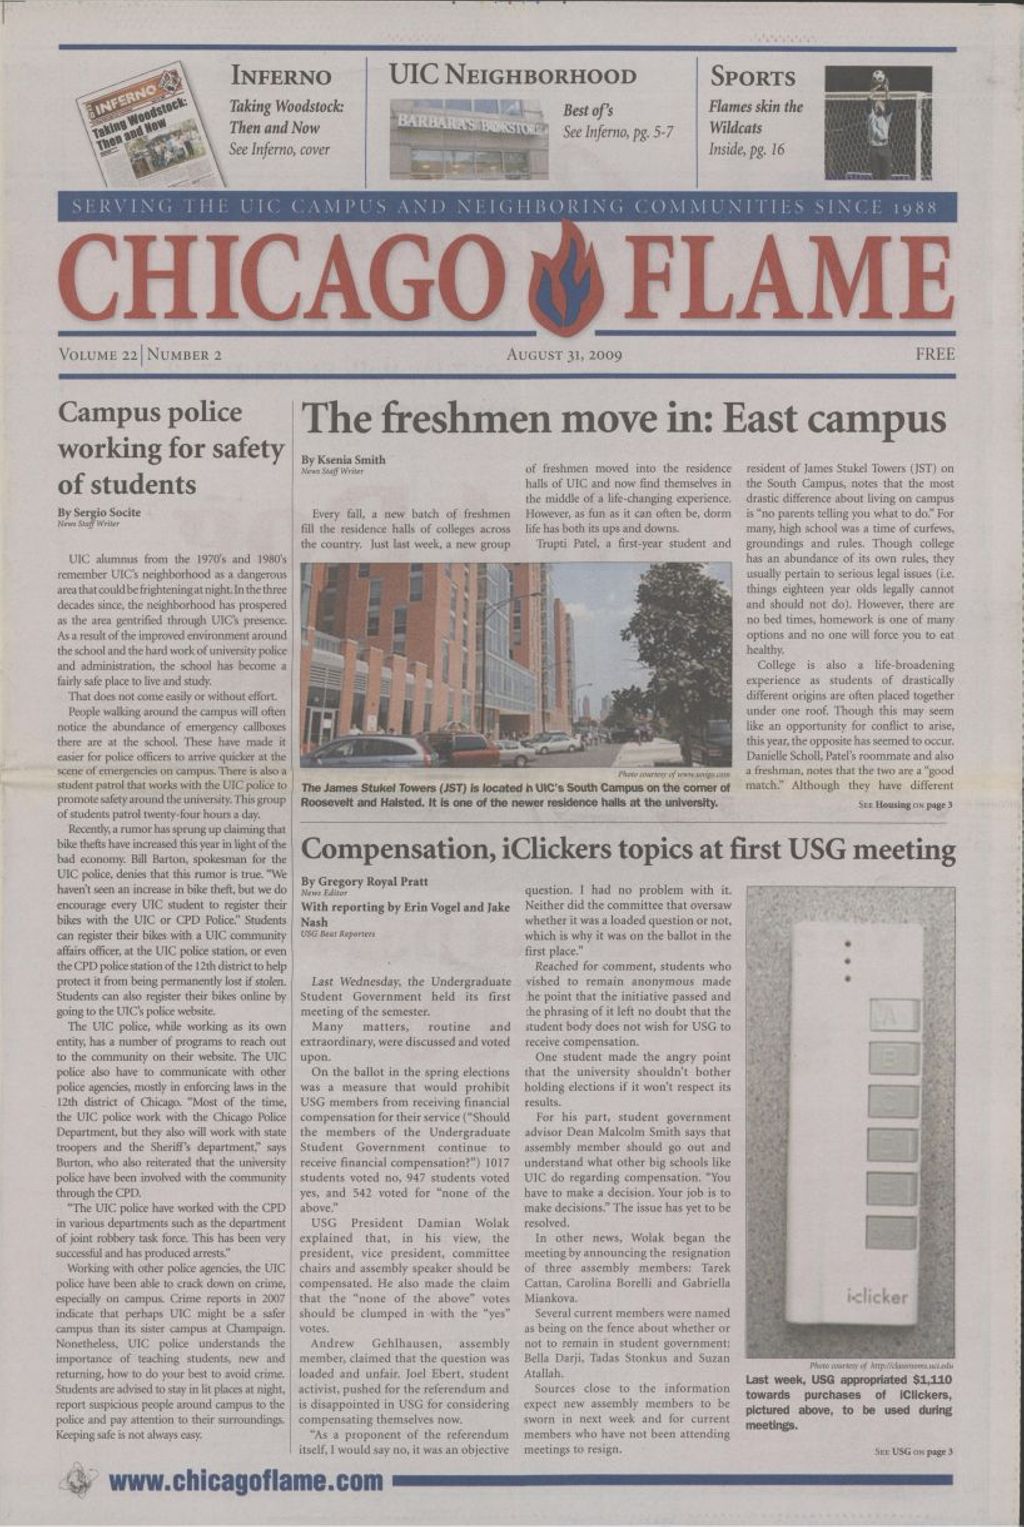 Chicago Flame (August 31, 2009)